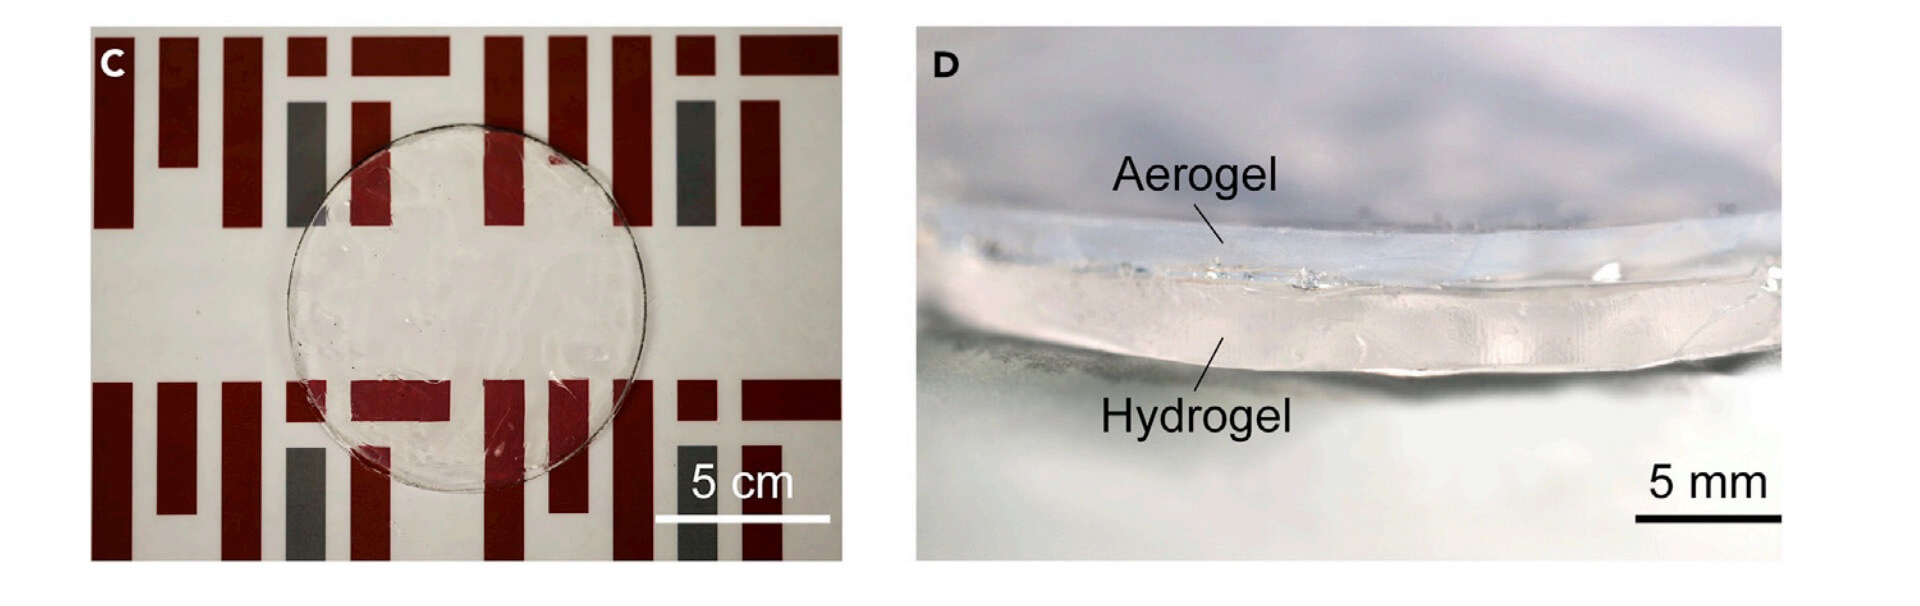 Top view and cross-section view of a hydrogel-aerogel bilayer.